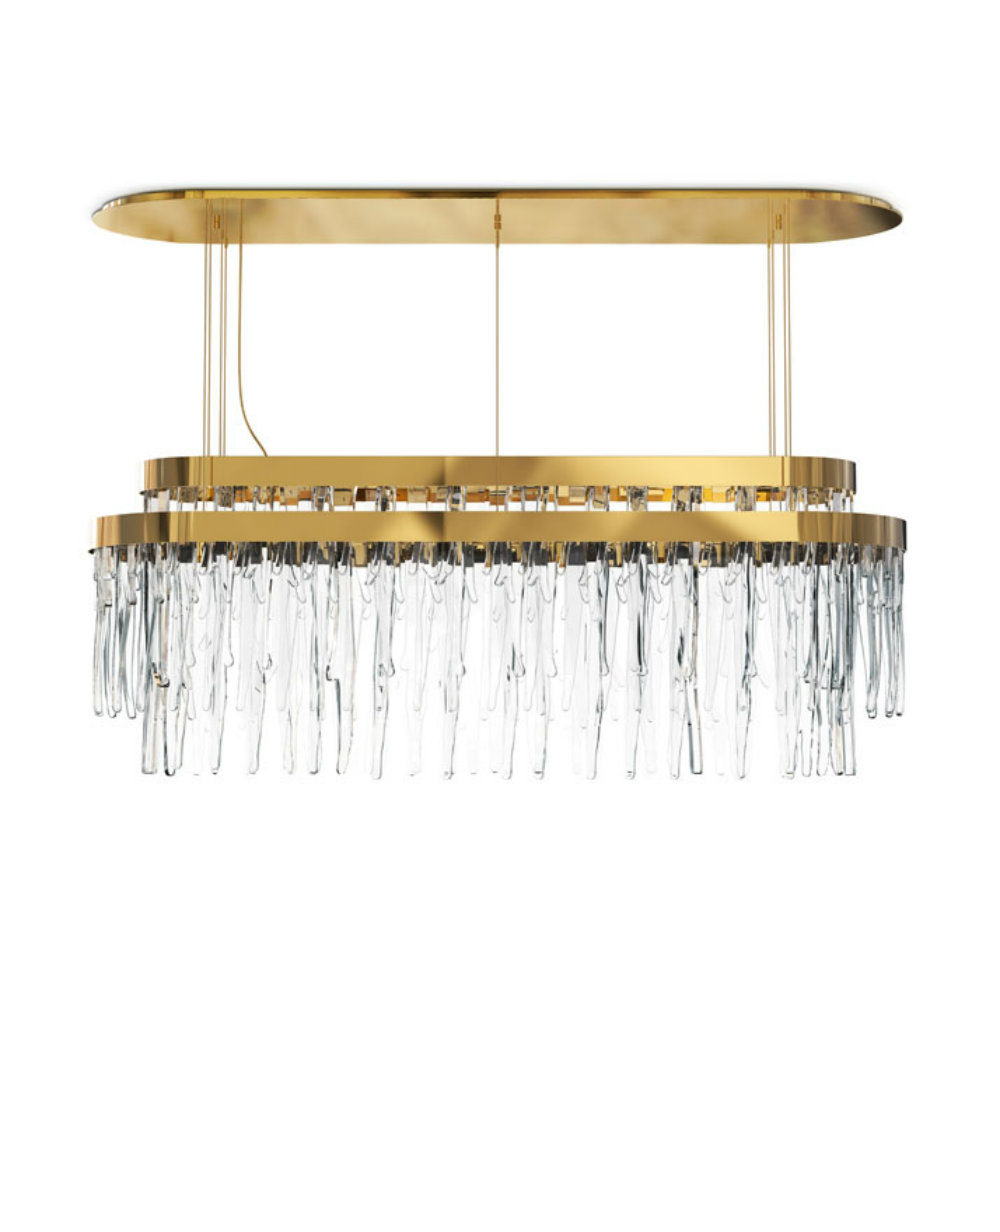 Lighting Inspiration: Meet The Babel Collection